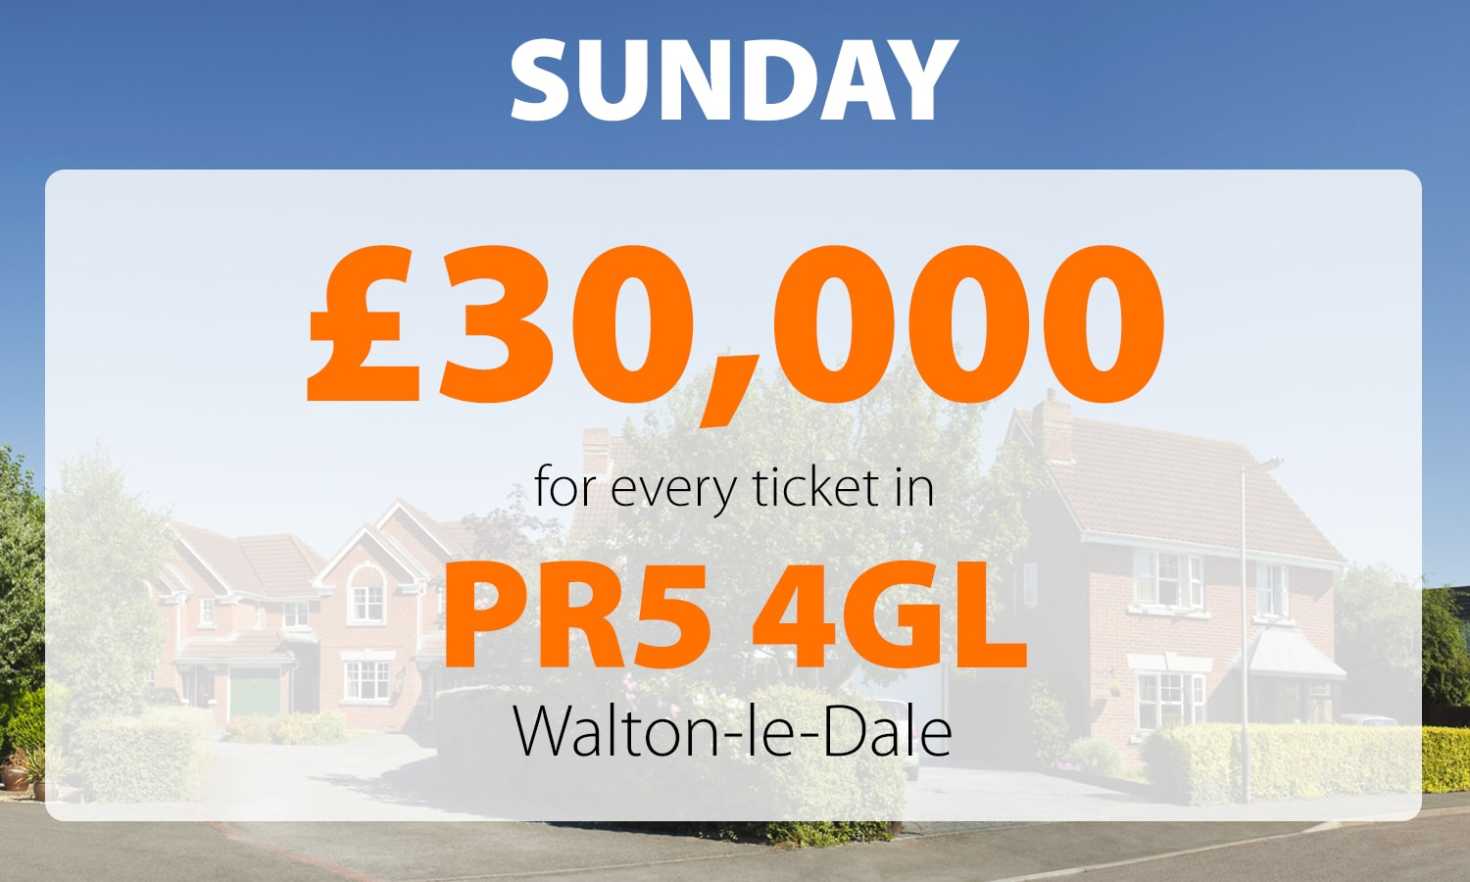 Two Walton-le-Dale residents have scooped an amazing £30,000 each